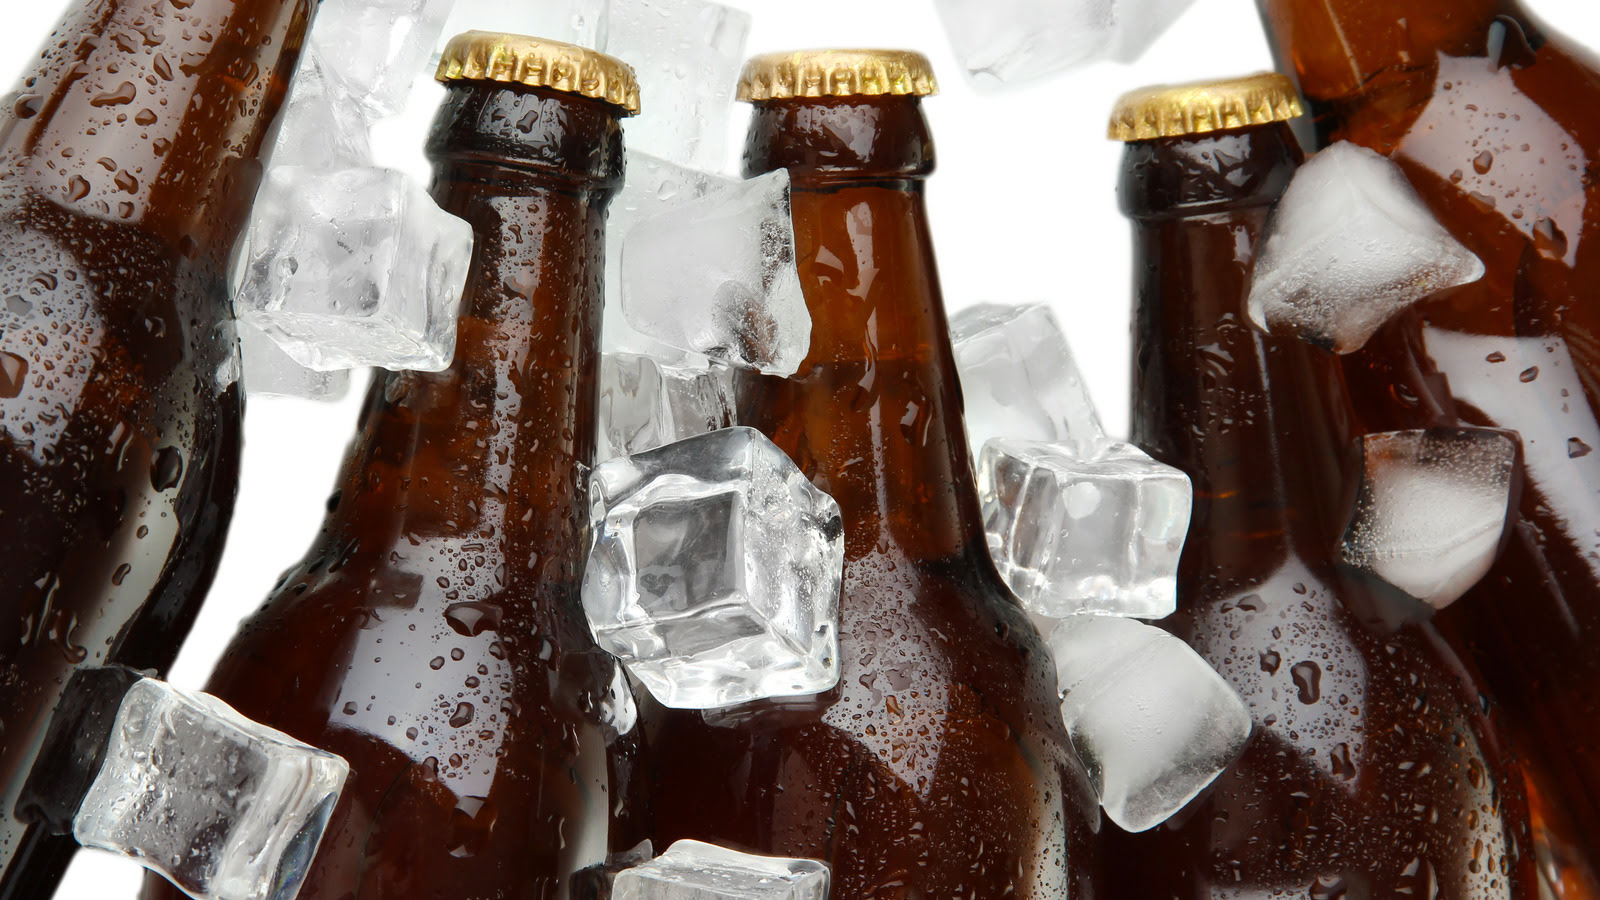 How Long Does It Take To Chill Beer in the Fridge or Freezer? The Best Way  to Get a Beer Cold Fast Without Freezing or Exploding - BrewTogether